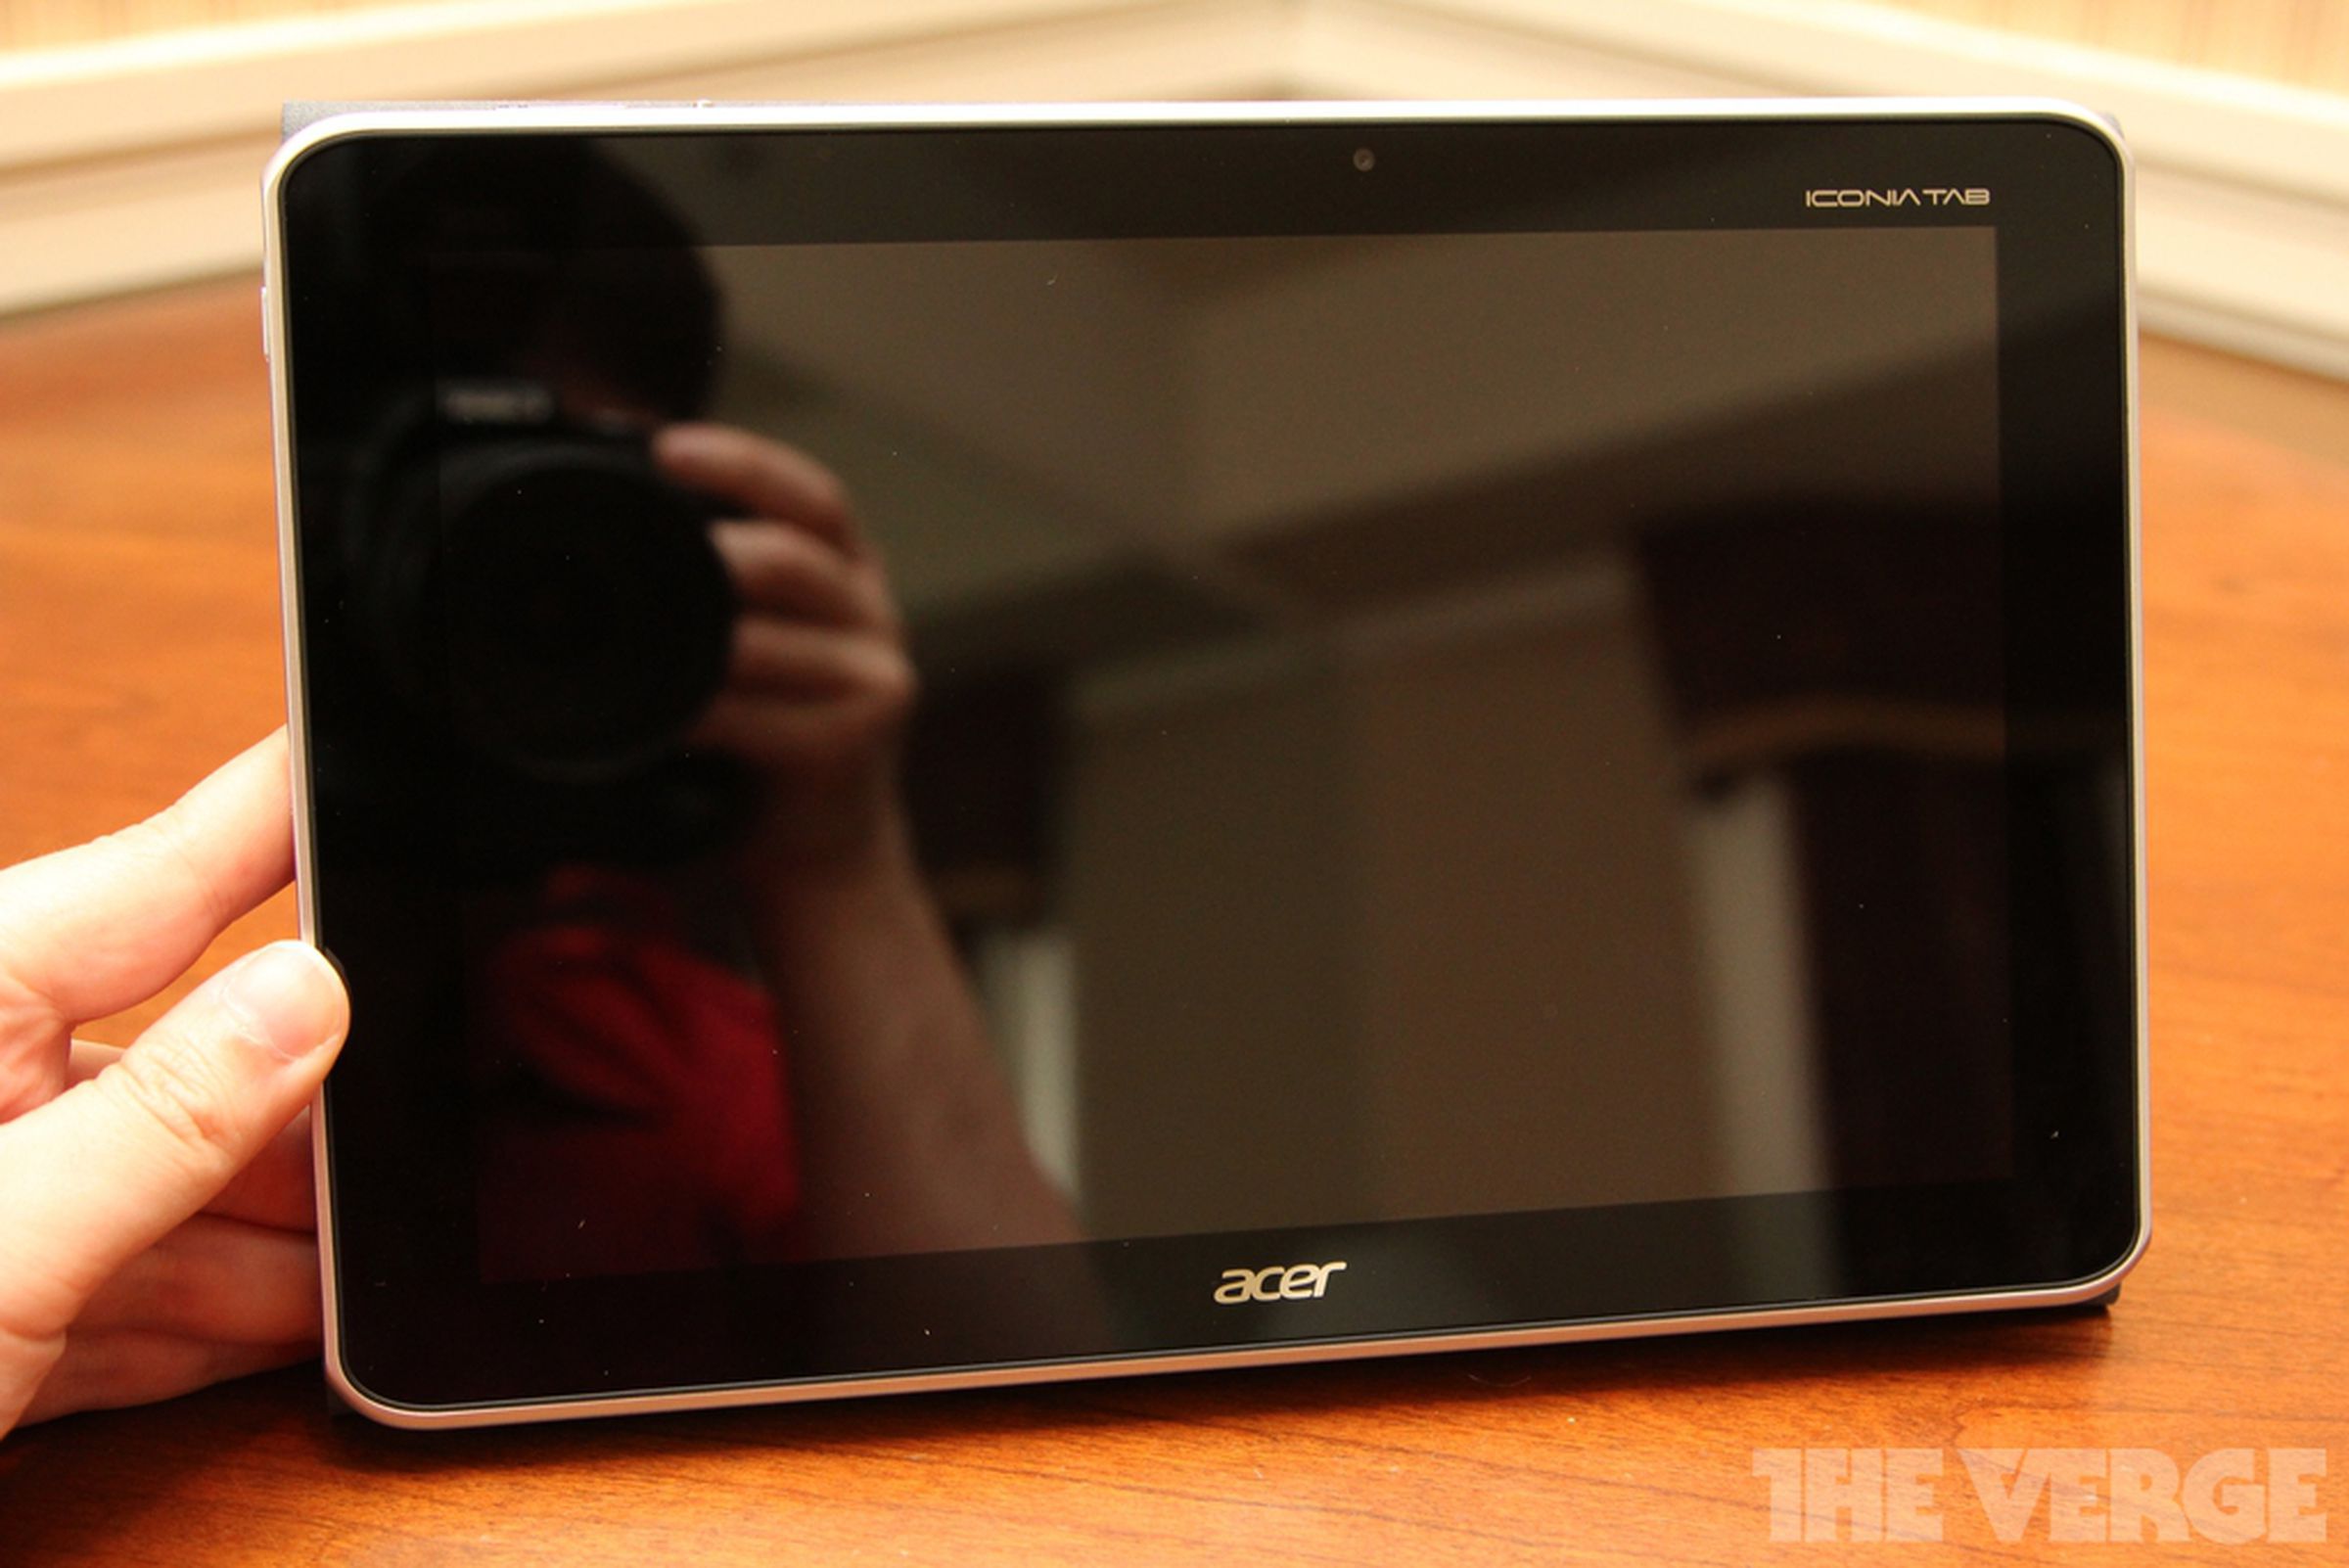 Acer Iconia Tab A700 hands-on pictures